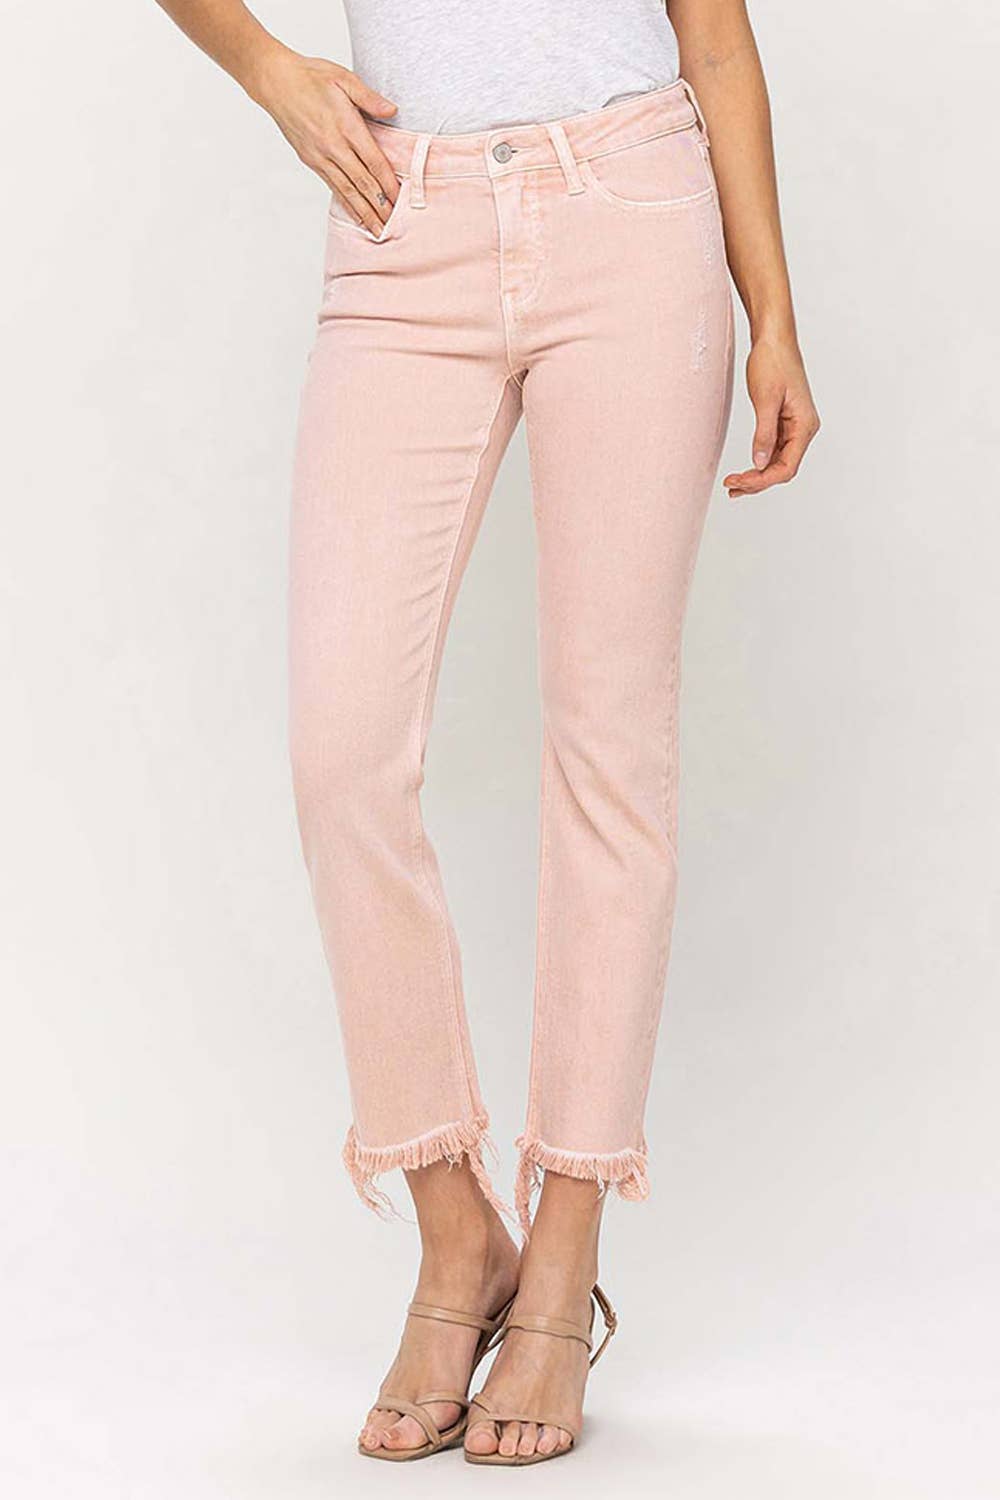 The Powder Pink Jeans